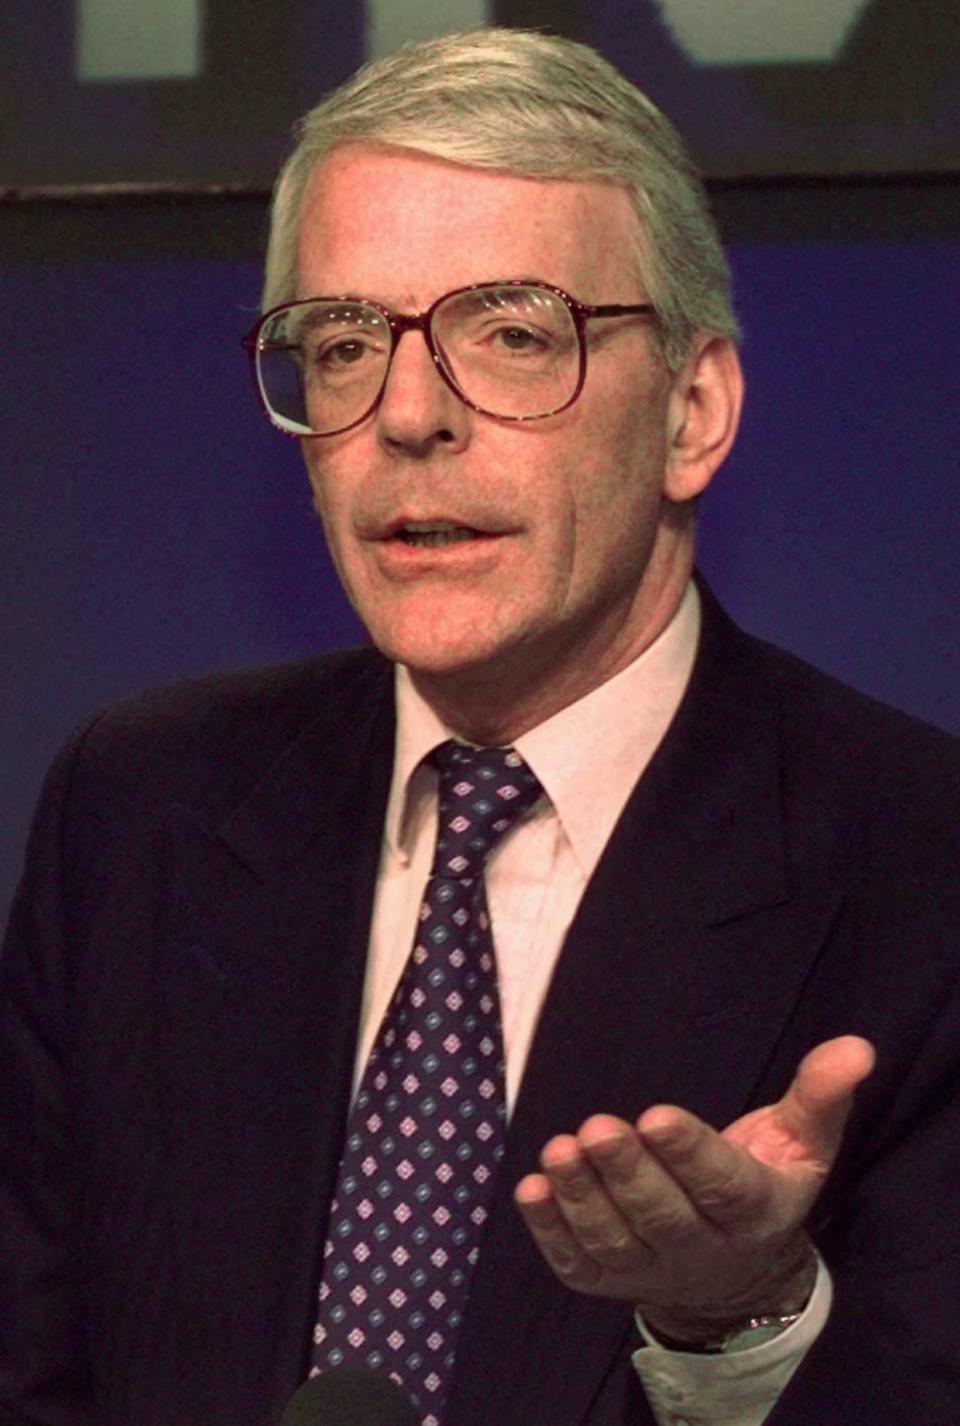 FILE - In this Wednesday, April 30, 1997 file photo Britain's the then Prime Minister John Major gestures at a press conference at the Conservative Party headquarters in London. (AP Photo/Lynne Sladky, file)